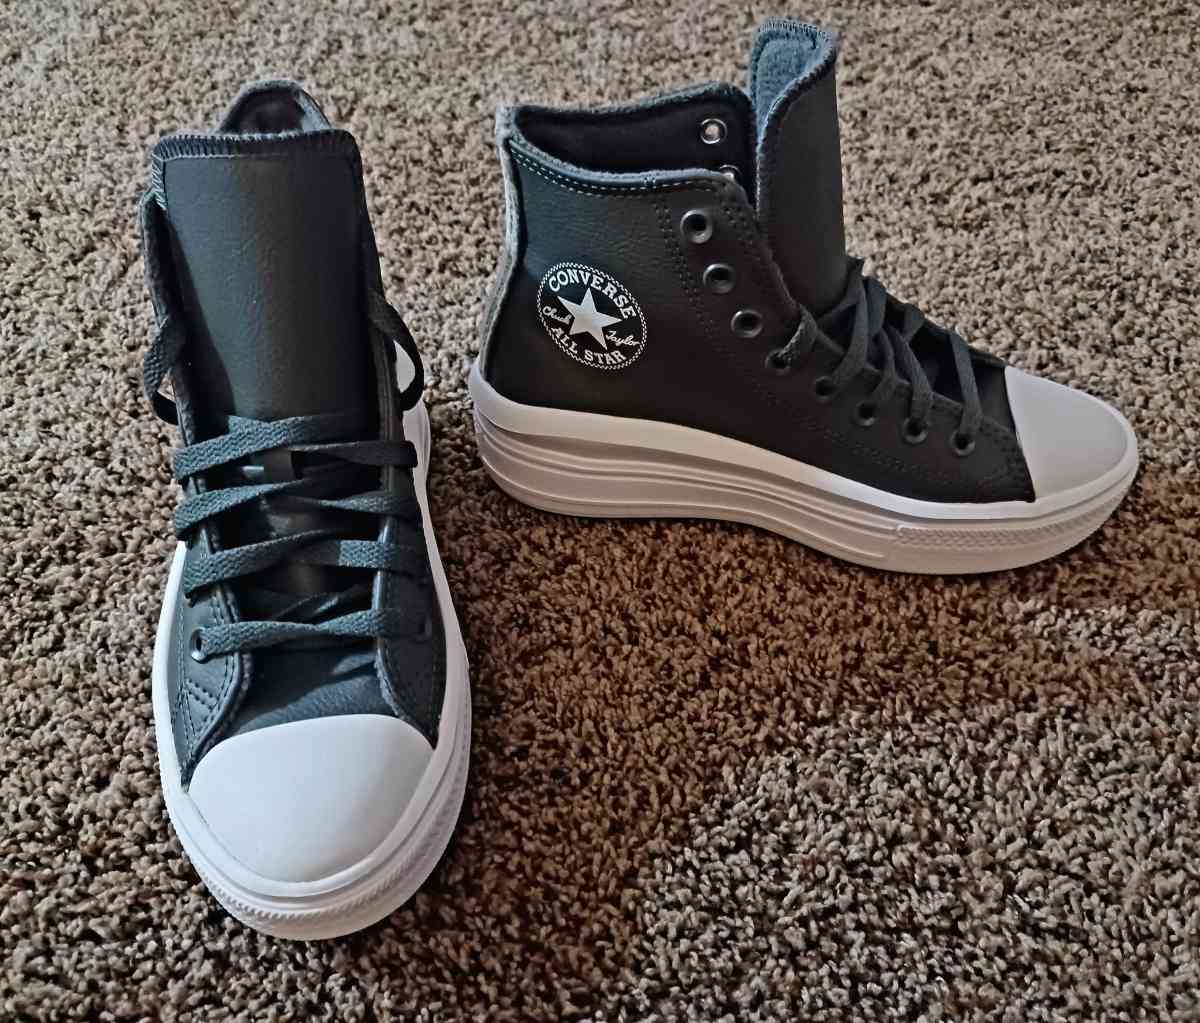 BRAND NEW WOMENS GRAY LEATHER HIGH TOP CONVERSE